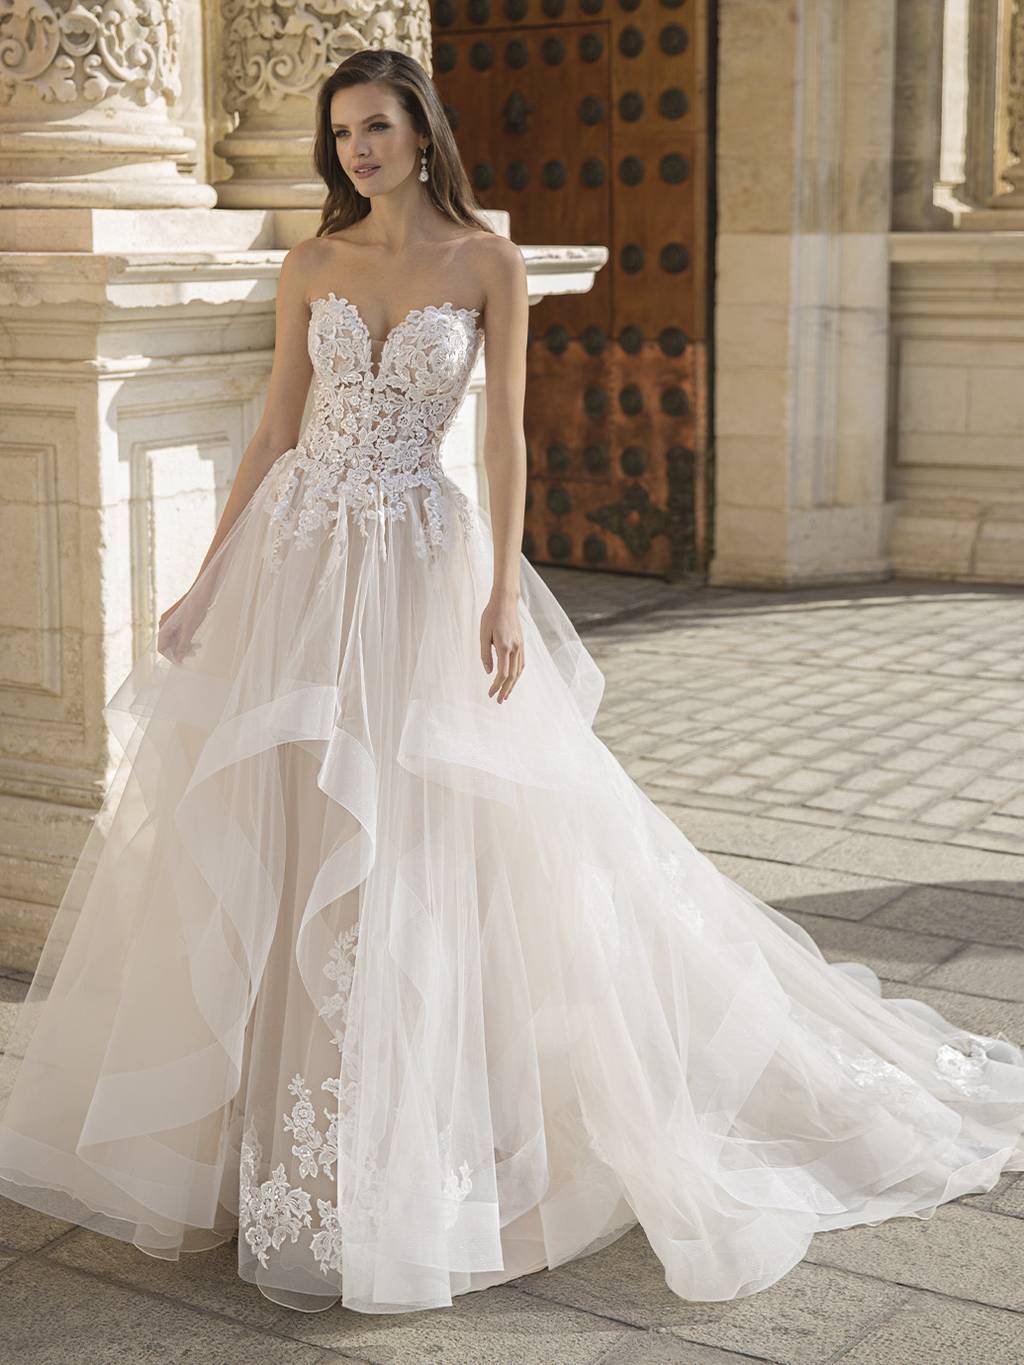 An ethereal, romantic gown with a sparkling illusion lace bodice leading to  a light, soft A-line tulle and chiffon skirt featuring a high